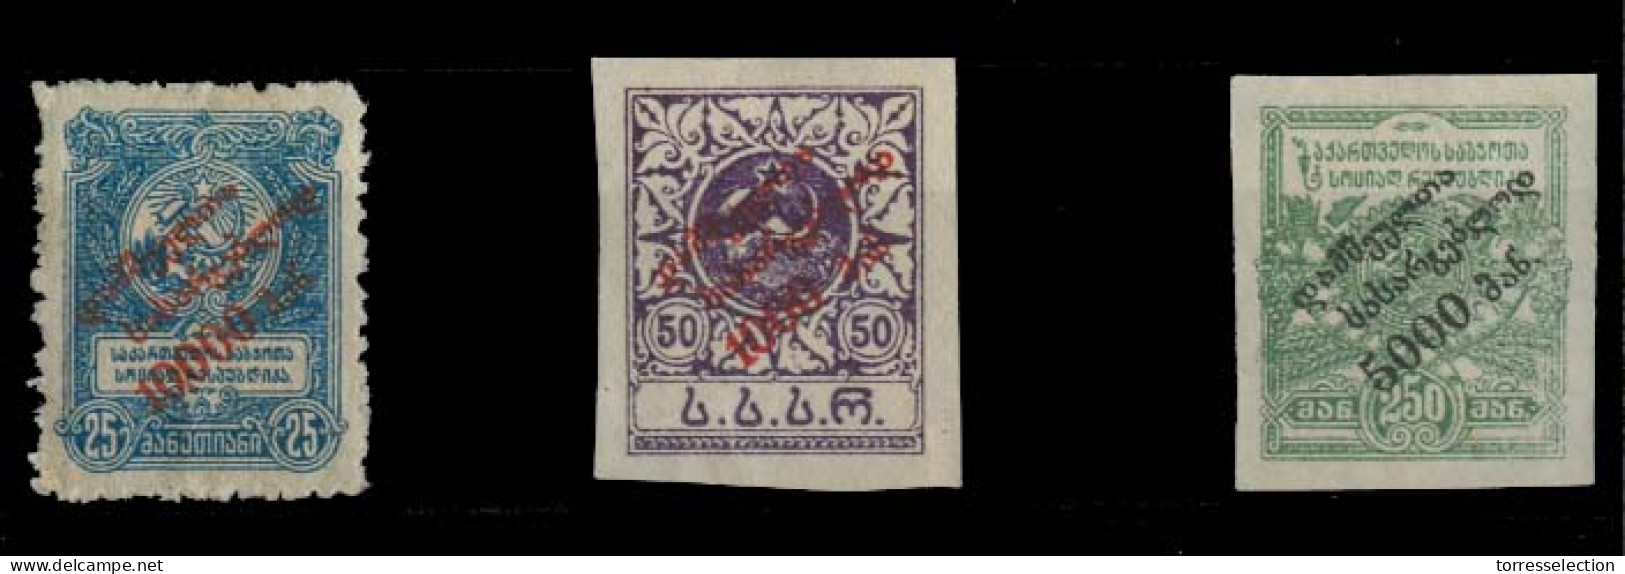 GEORGIA. C.1920. 3 Overprinted Stamps. Sold As Is. Rare In All Forms. - Georgien